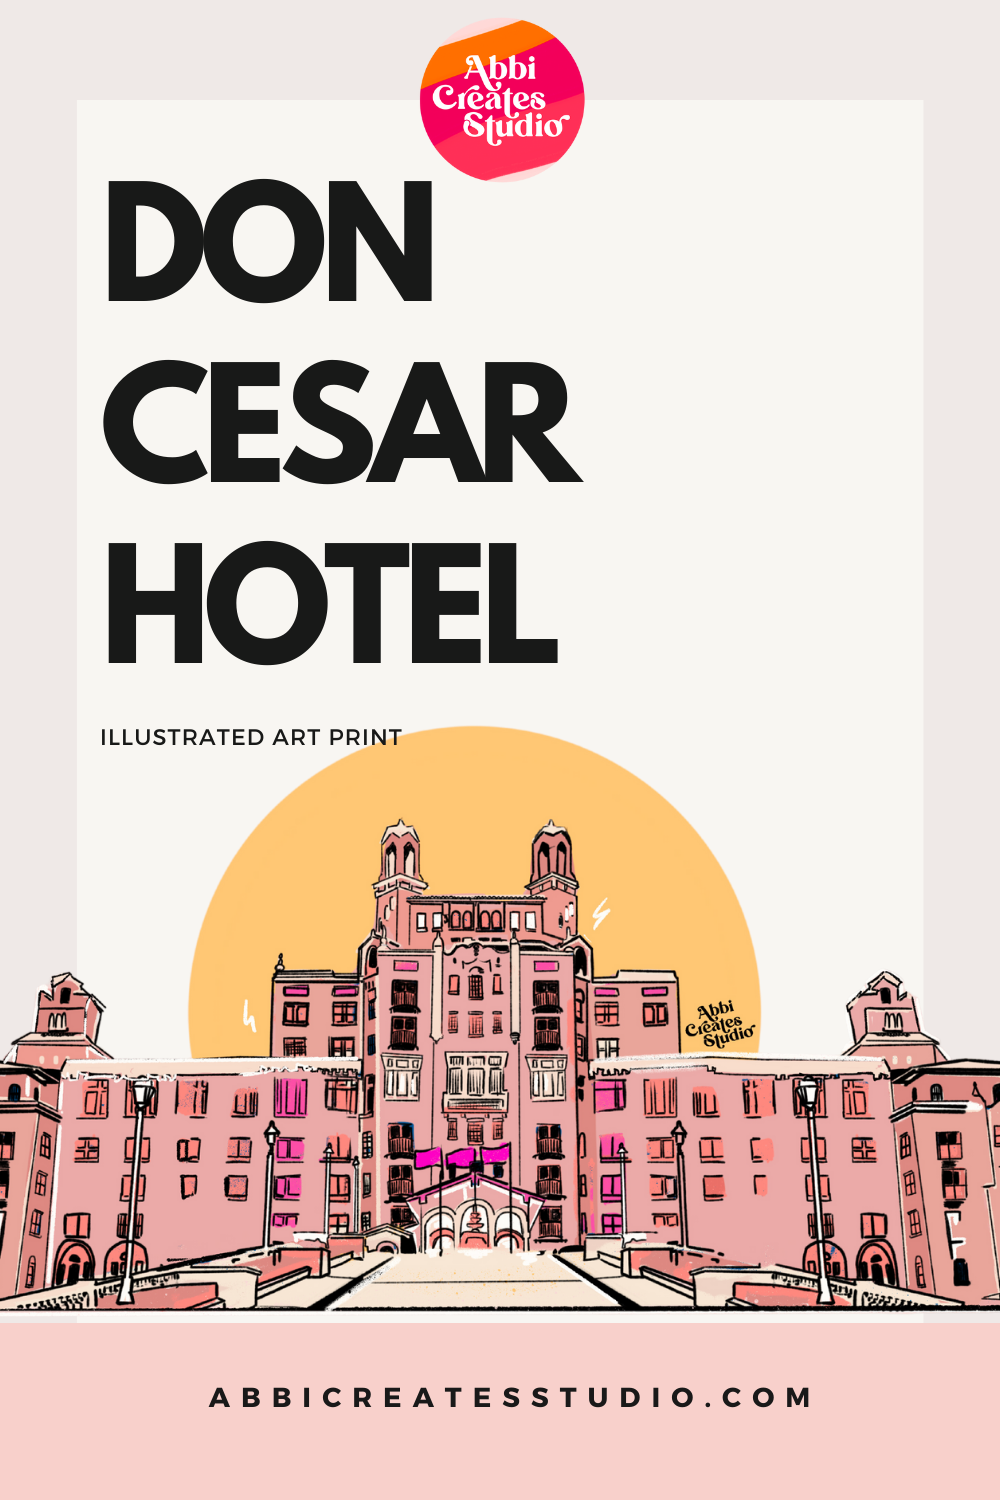 Digital illustration print of the Don Cesar Hotel in St. Pete, featuring vibrant pink colors and exquisite detail, perfect for adding elegance and sophistication to any space